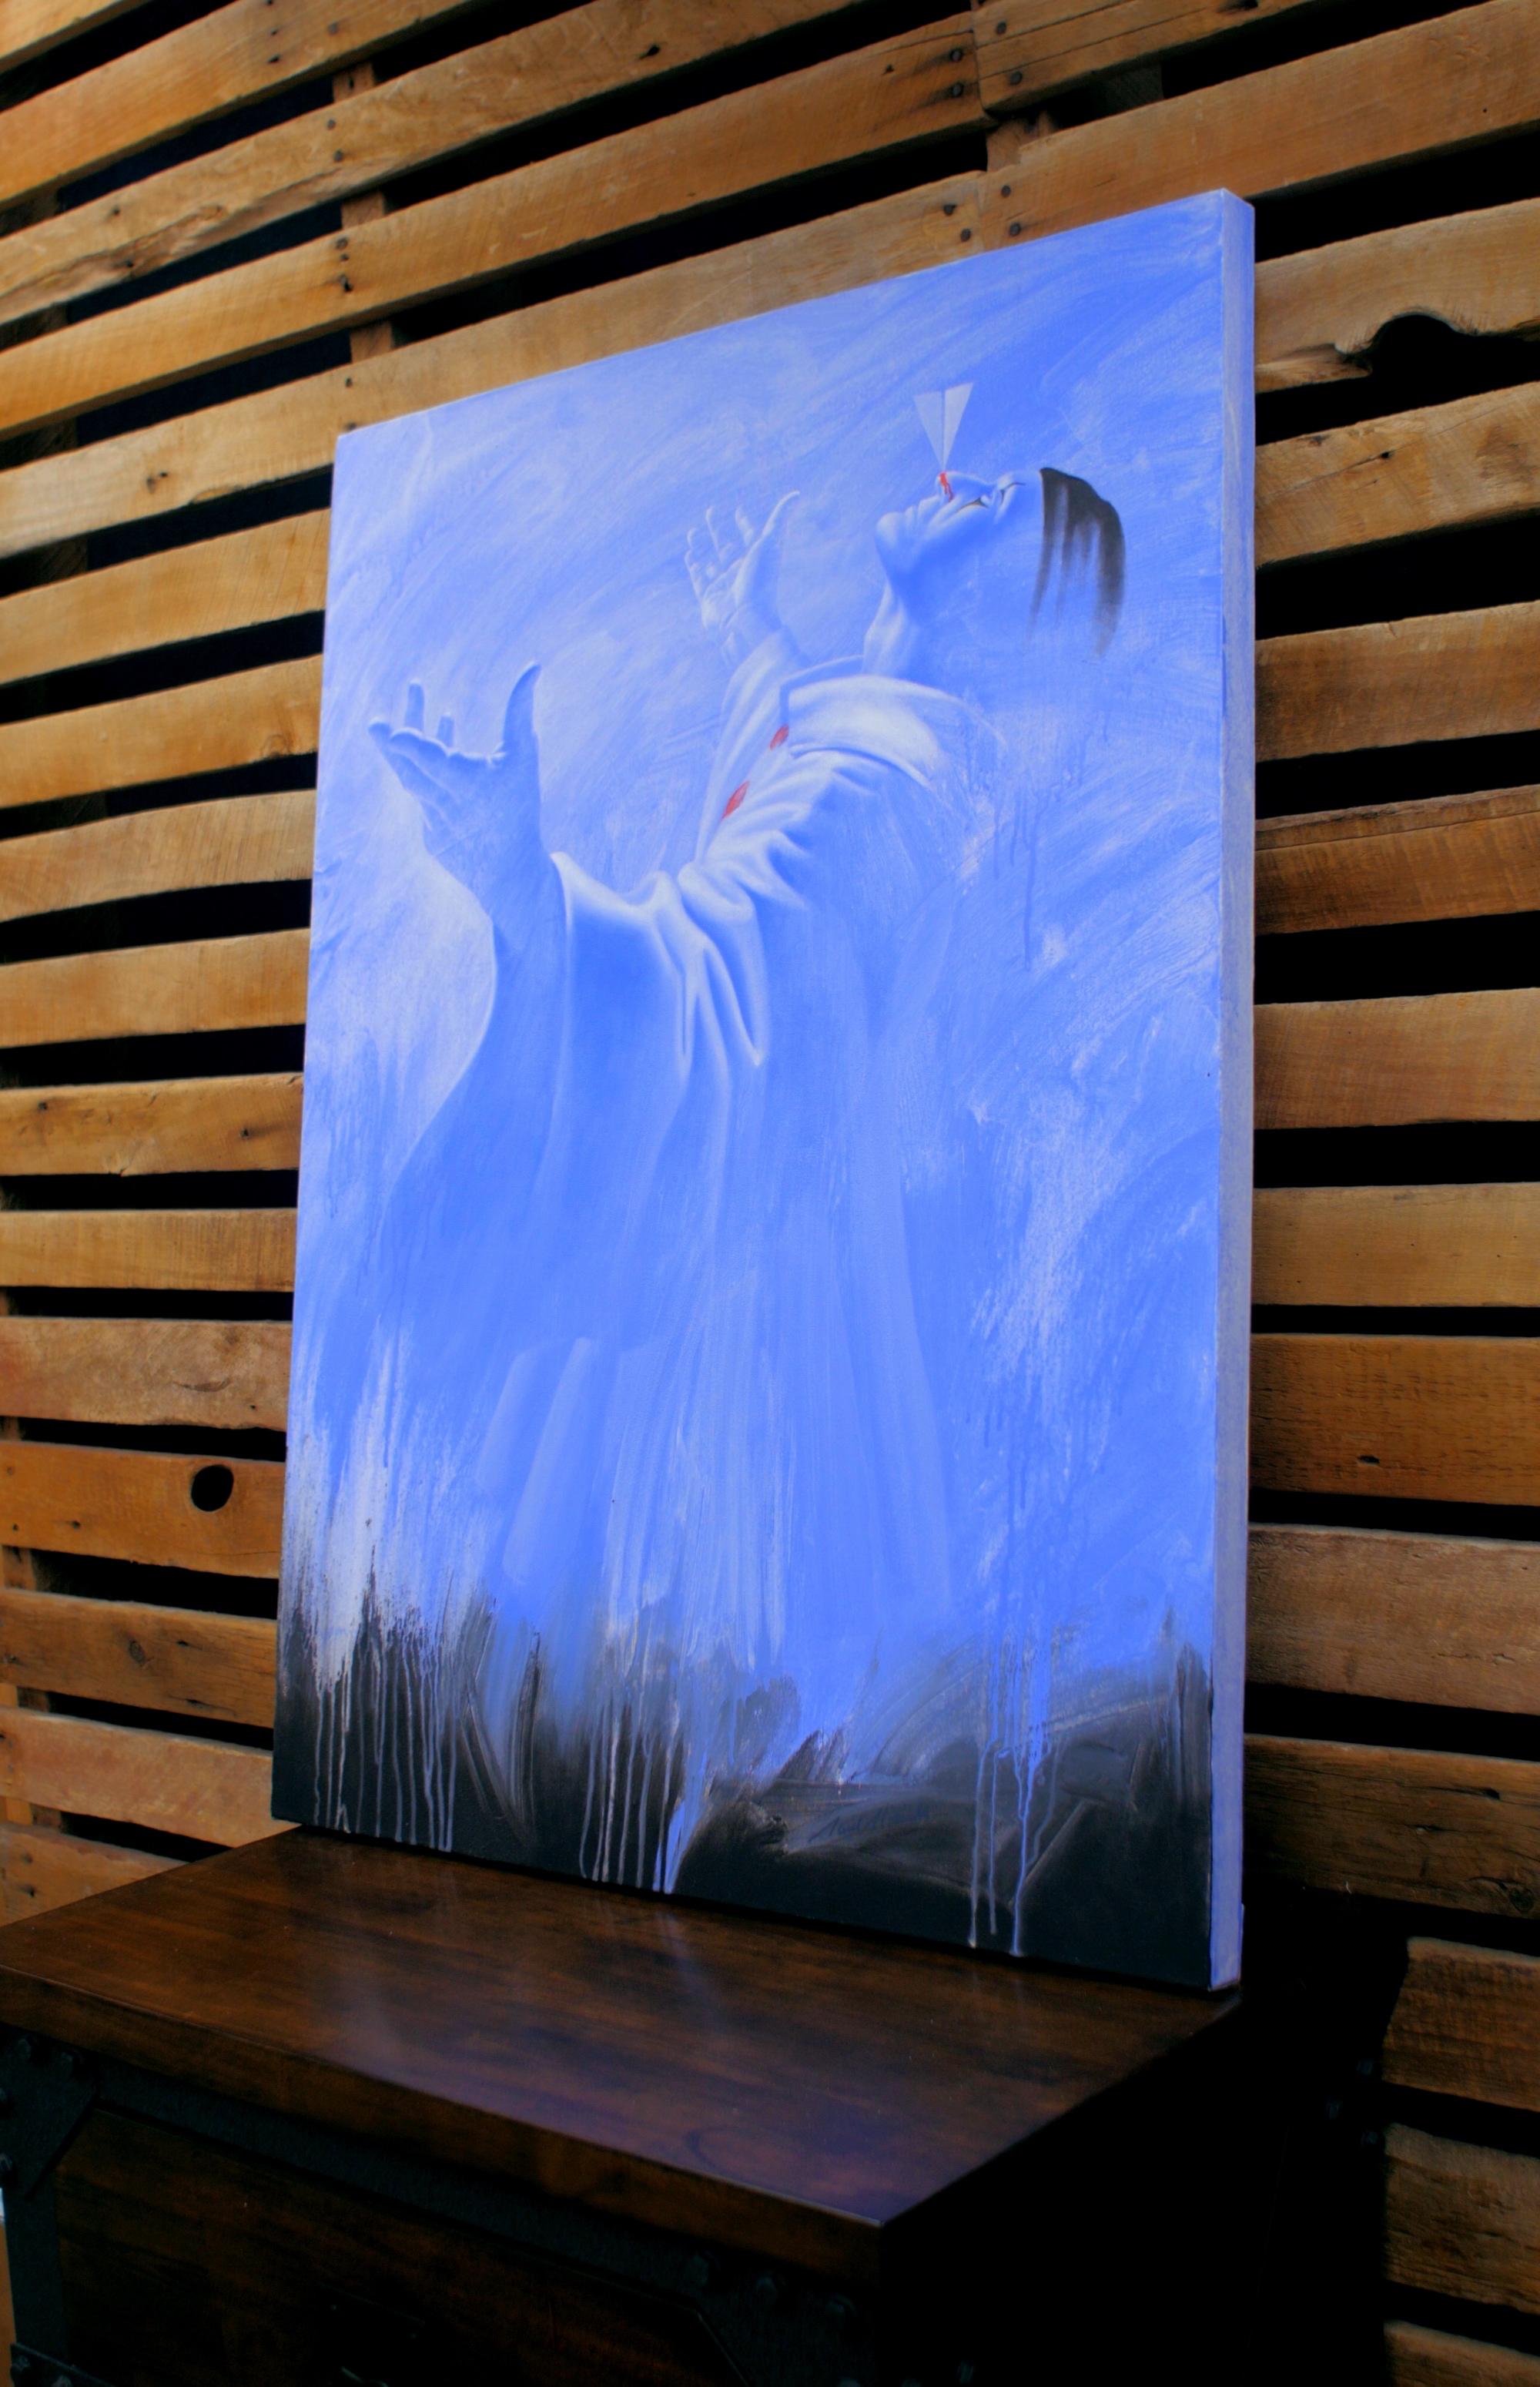 This acrylic and alkyd canvas painting  by Paul Micich features a large ethereal clown figure in white against a blue sky balancing a paper airplane on the tip of his nose.  The work is part of his 'Paper Airplane' series.  The artist states that he